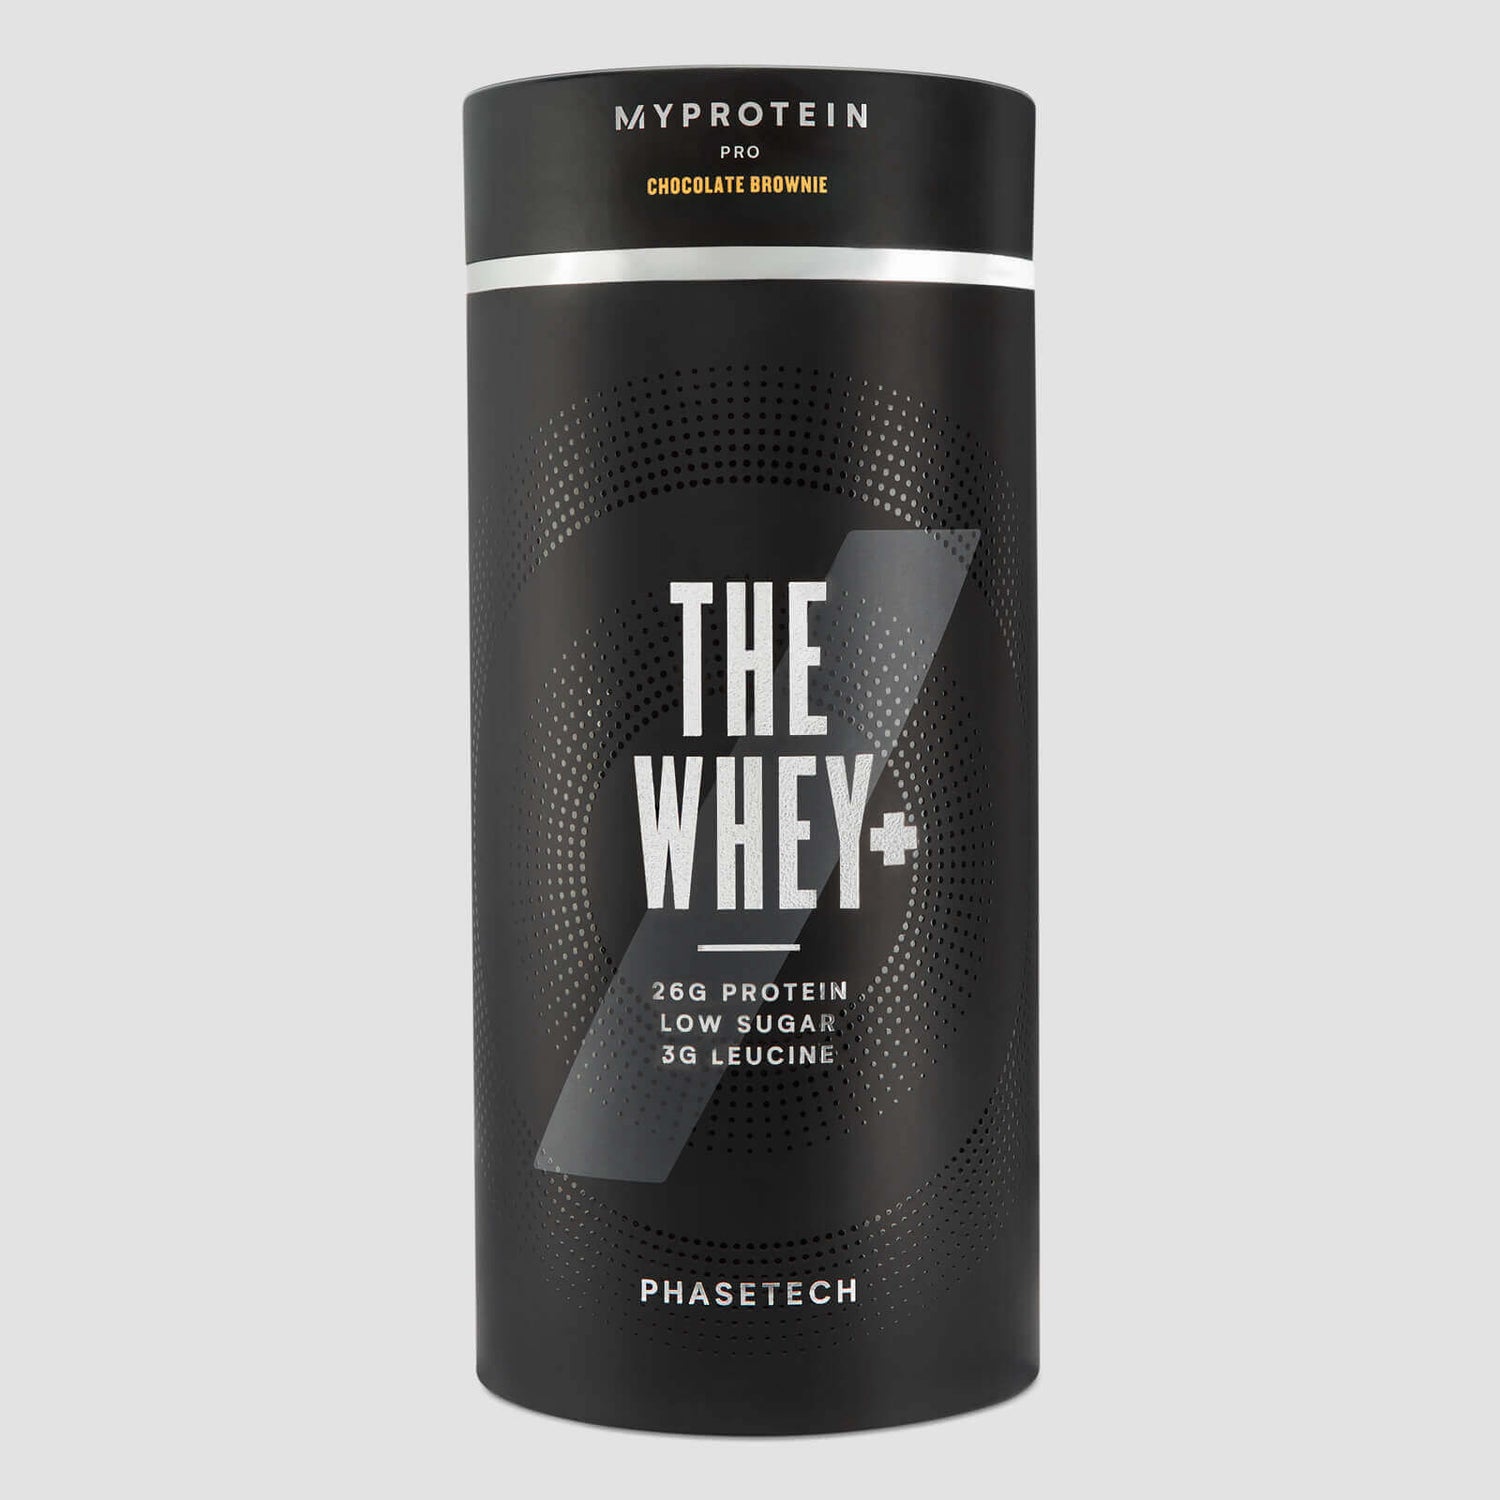 „THE Whey+“